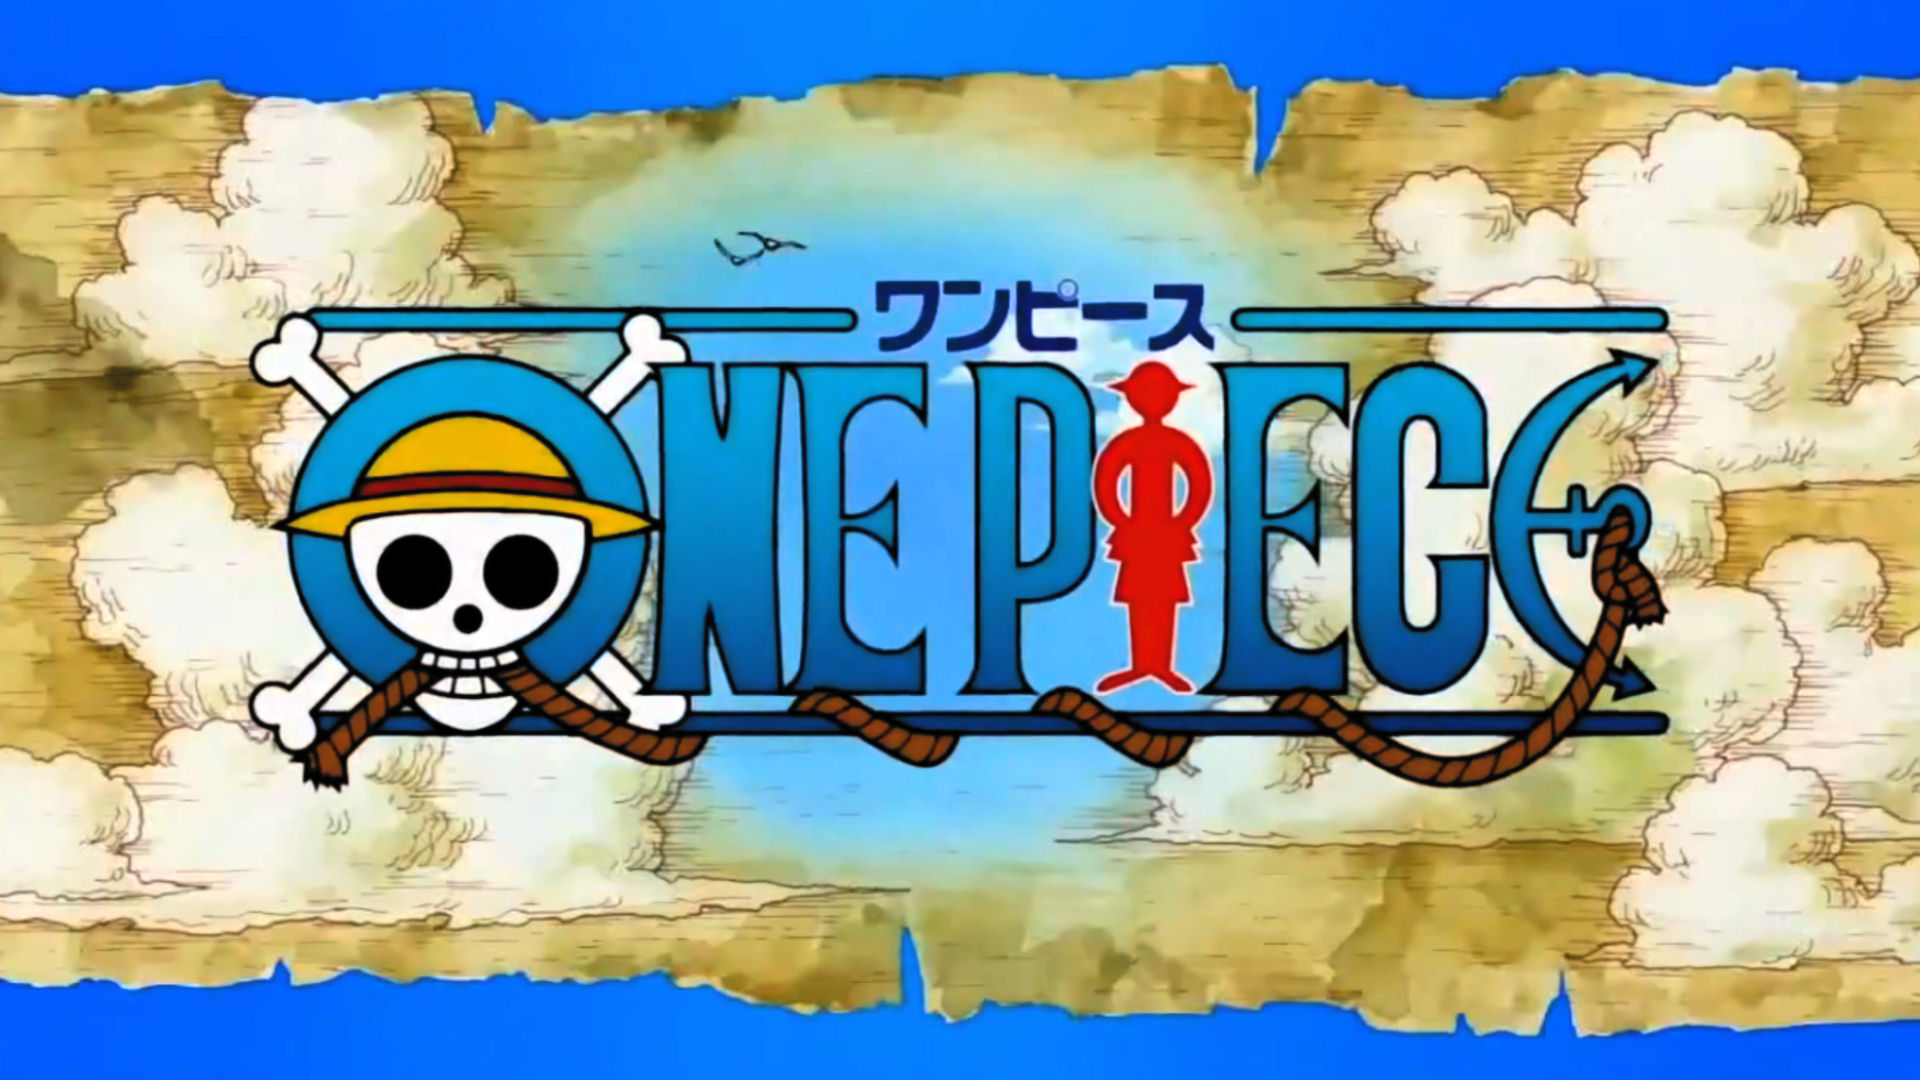 Download the One Piece Anime Wallpaper, One Piece Anime iPhone ...